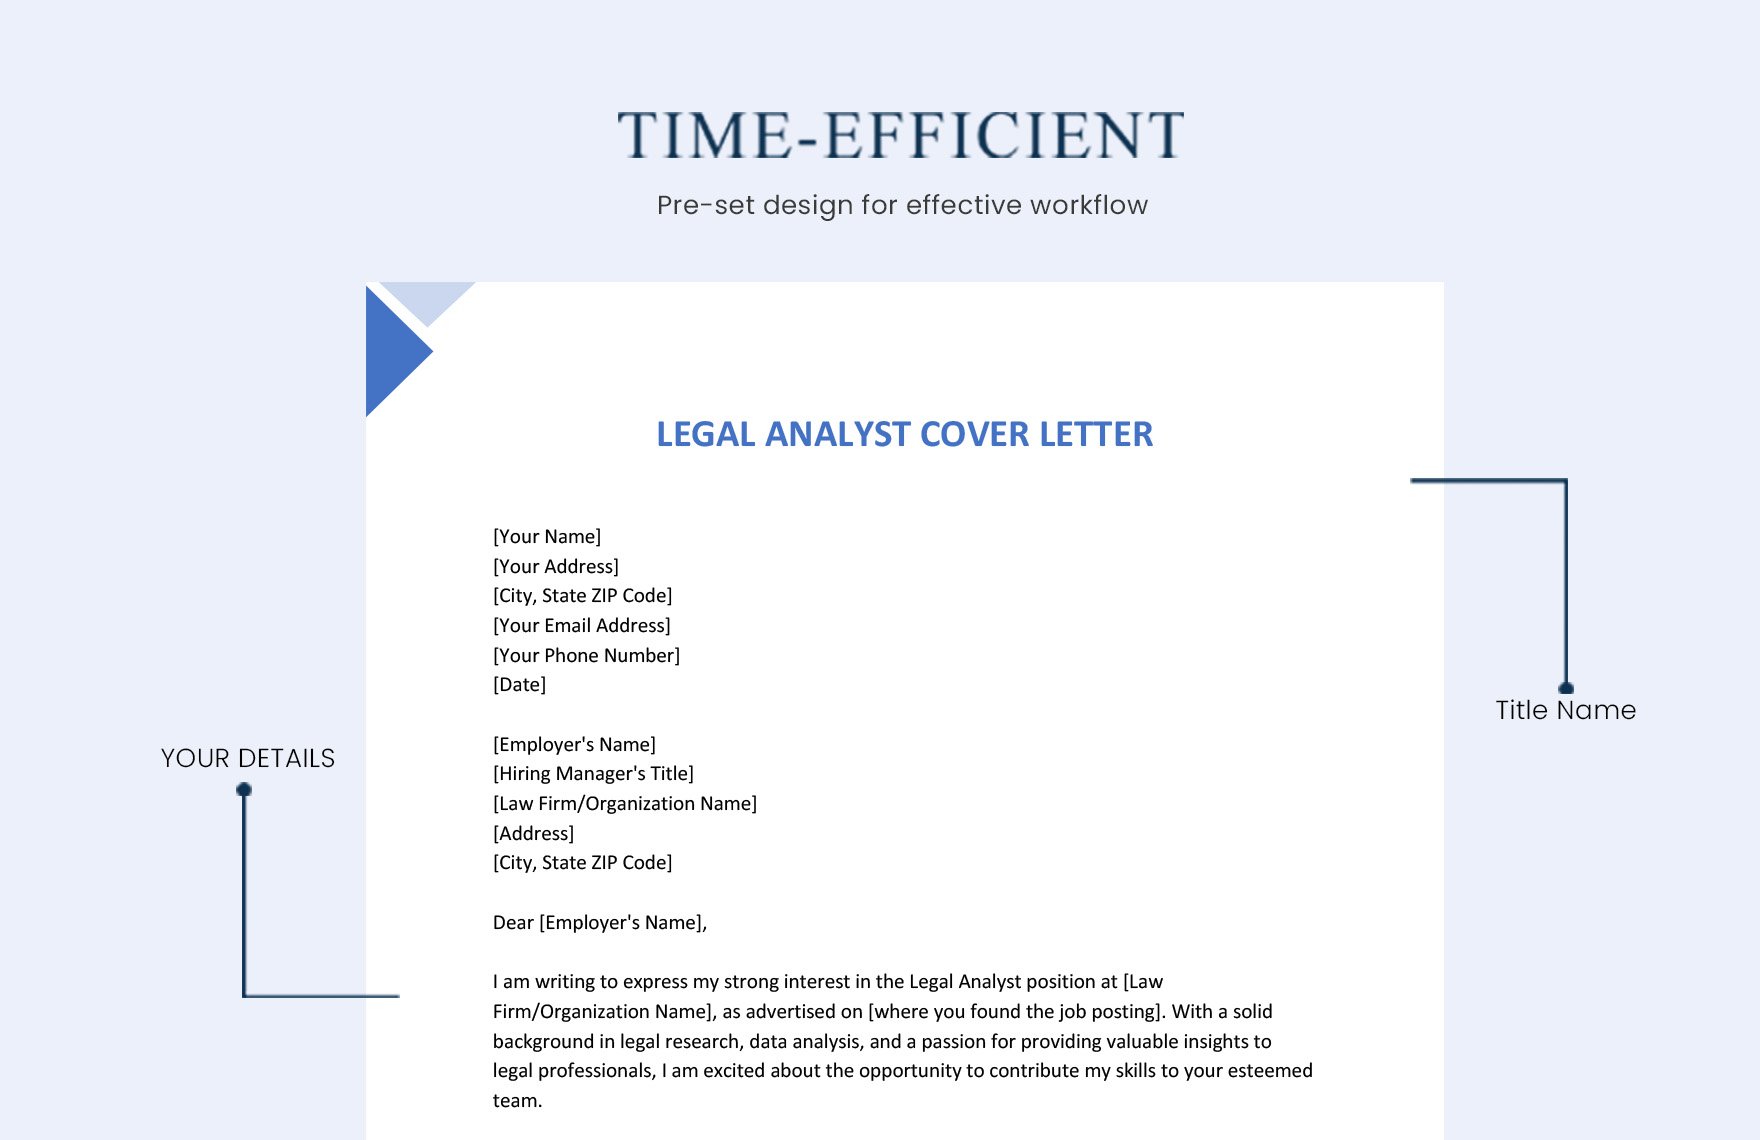 Legal Analyst Cover Letter